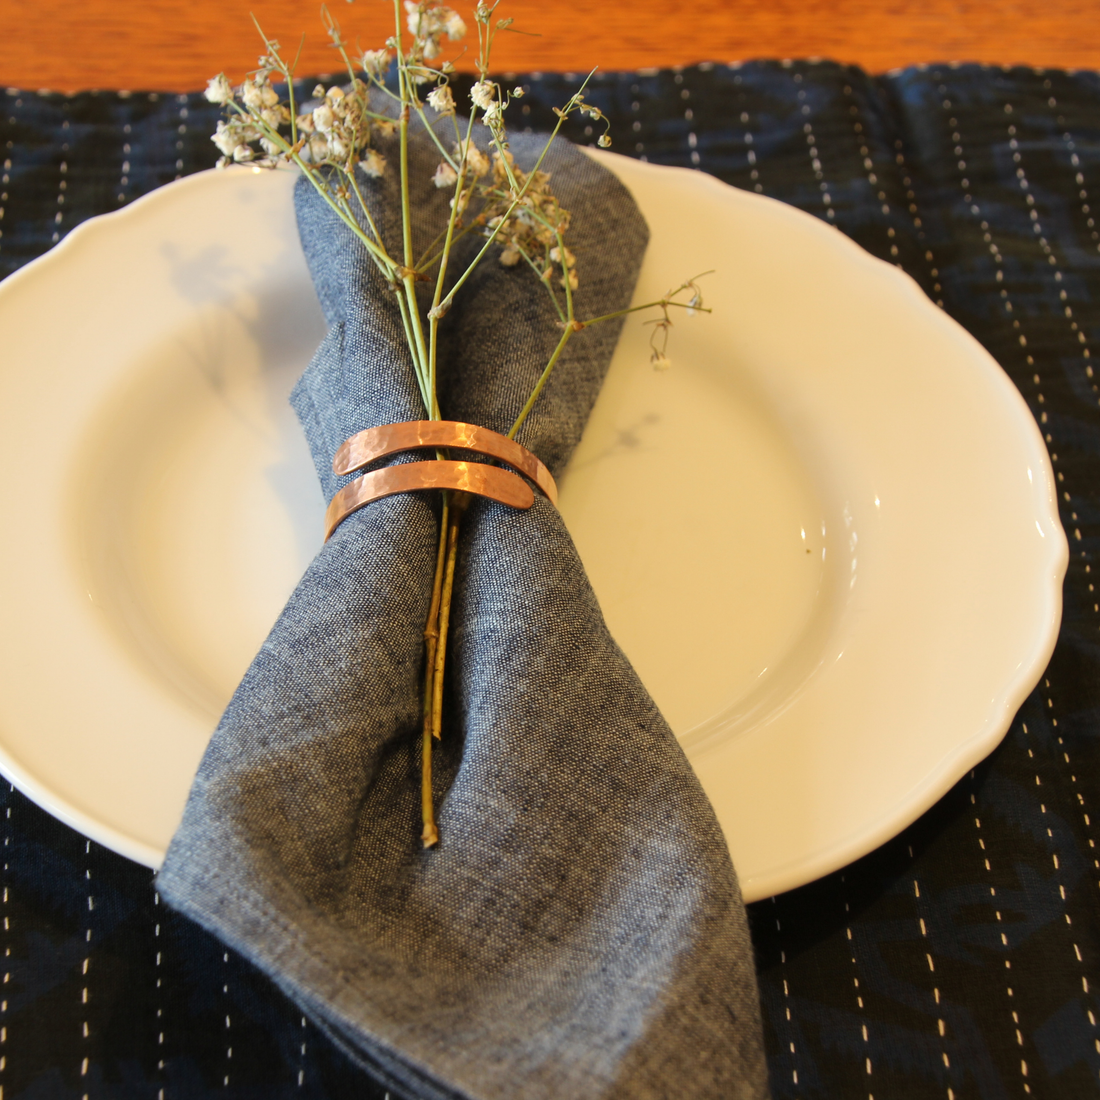 Table and Kitchen fair trade ethical sustainable fashion Copper Napkin Rings- Set of Four conscious purchase Basha